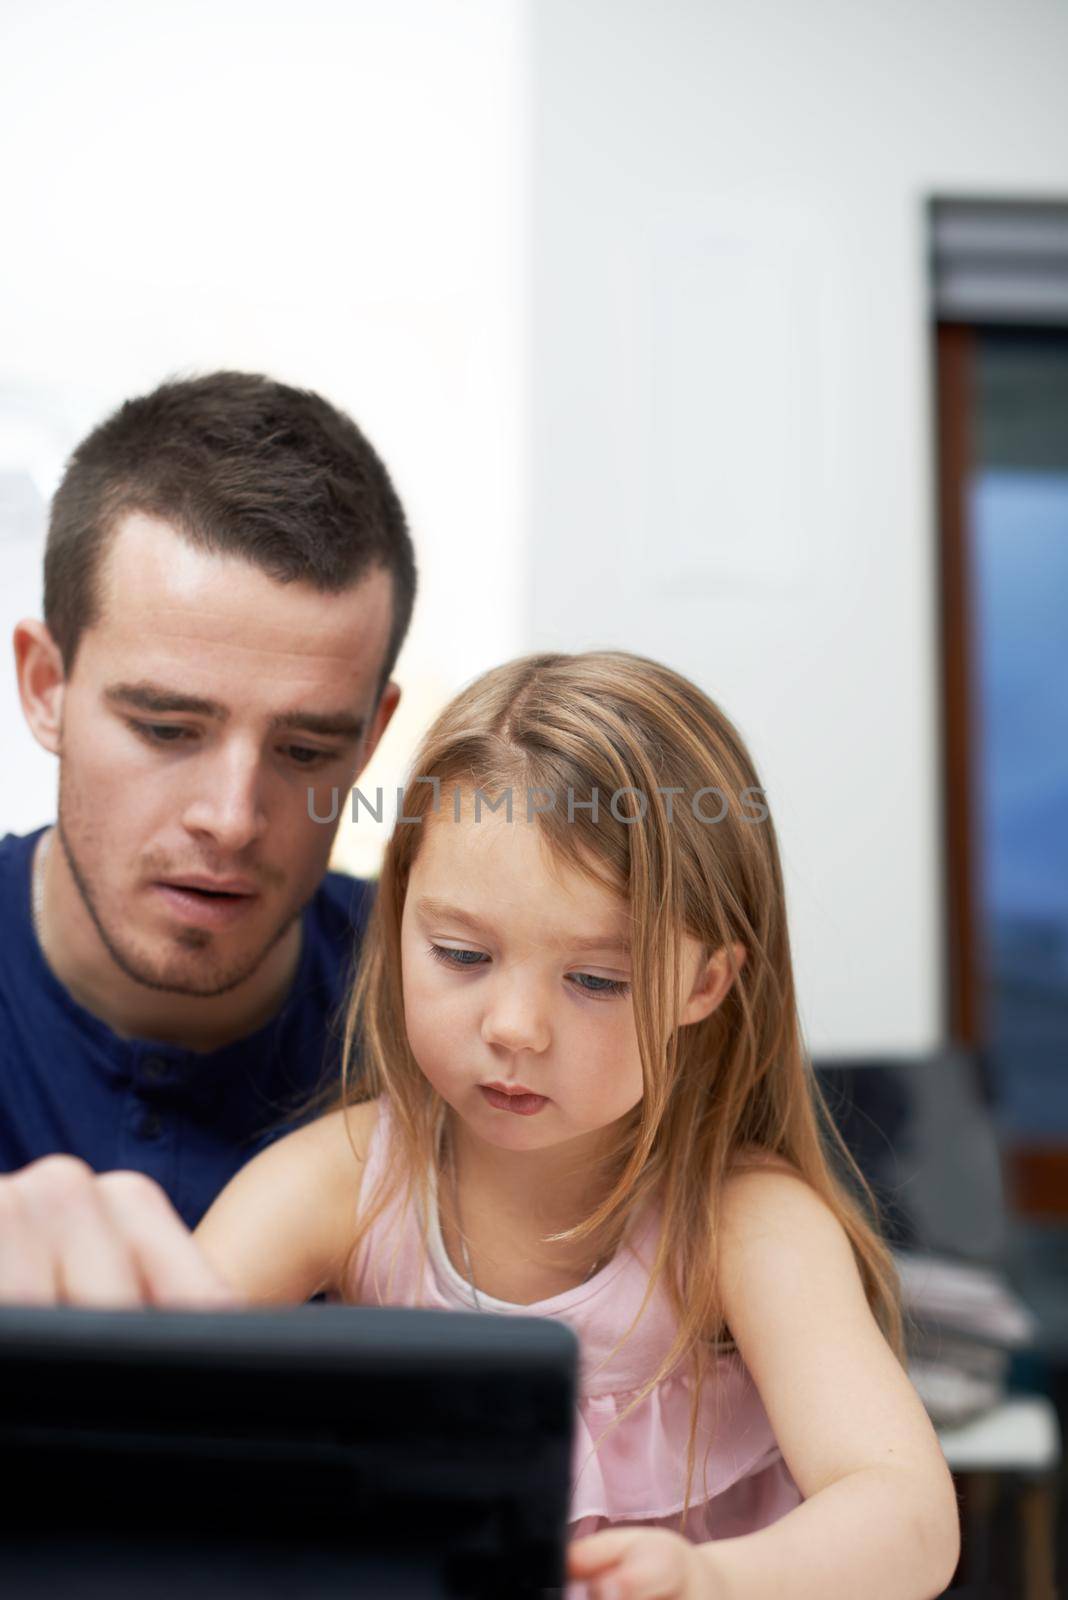 Sharing the wonders of technology with her. A father teaching his daughter how to use technology